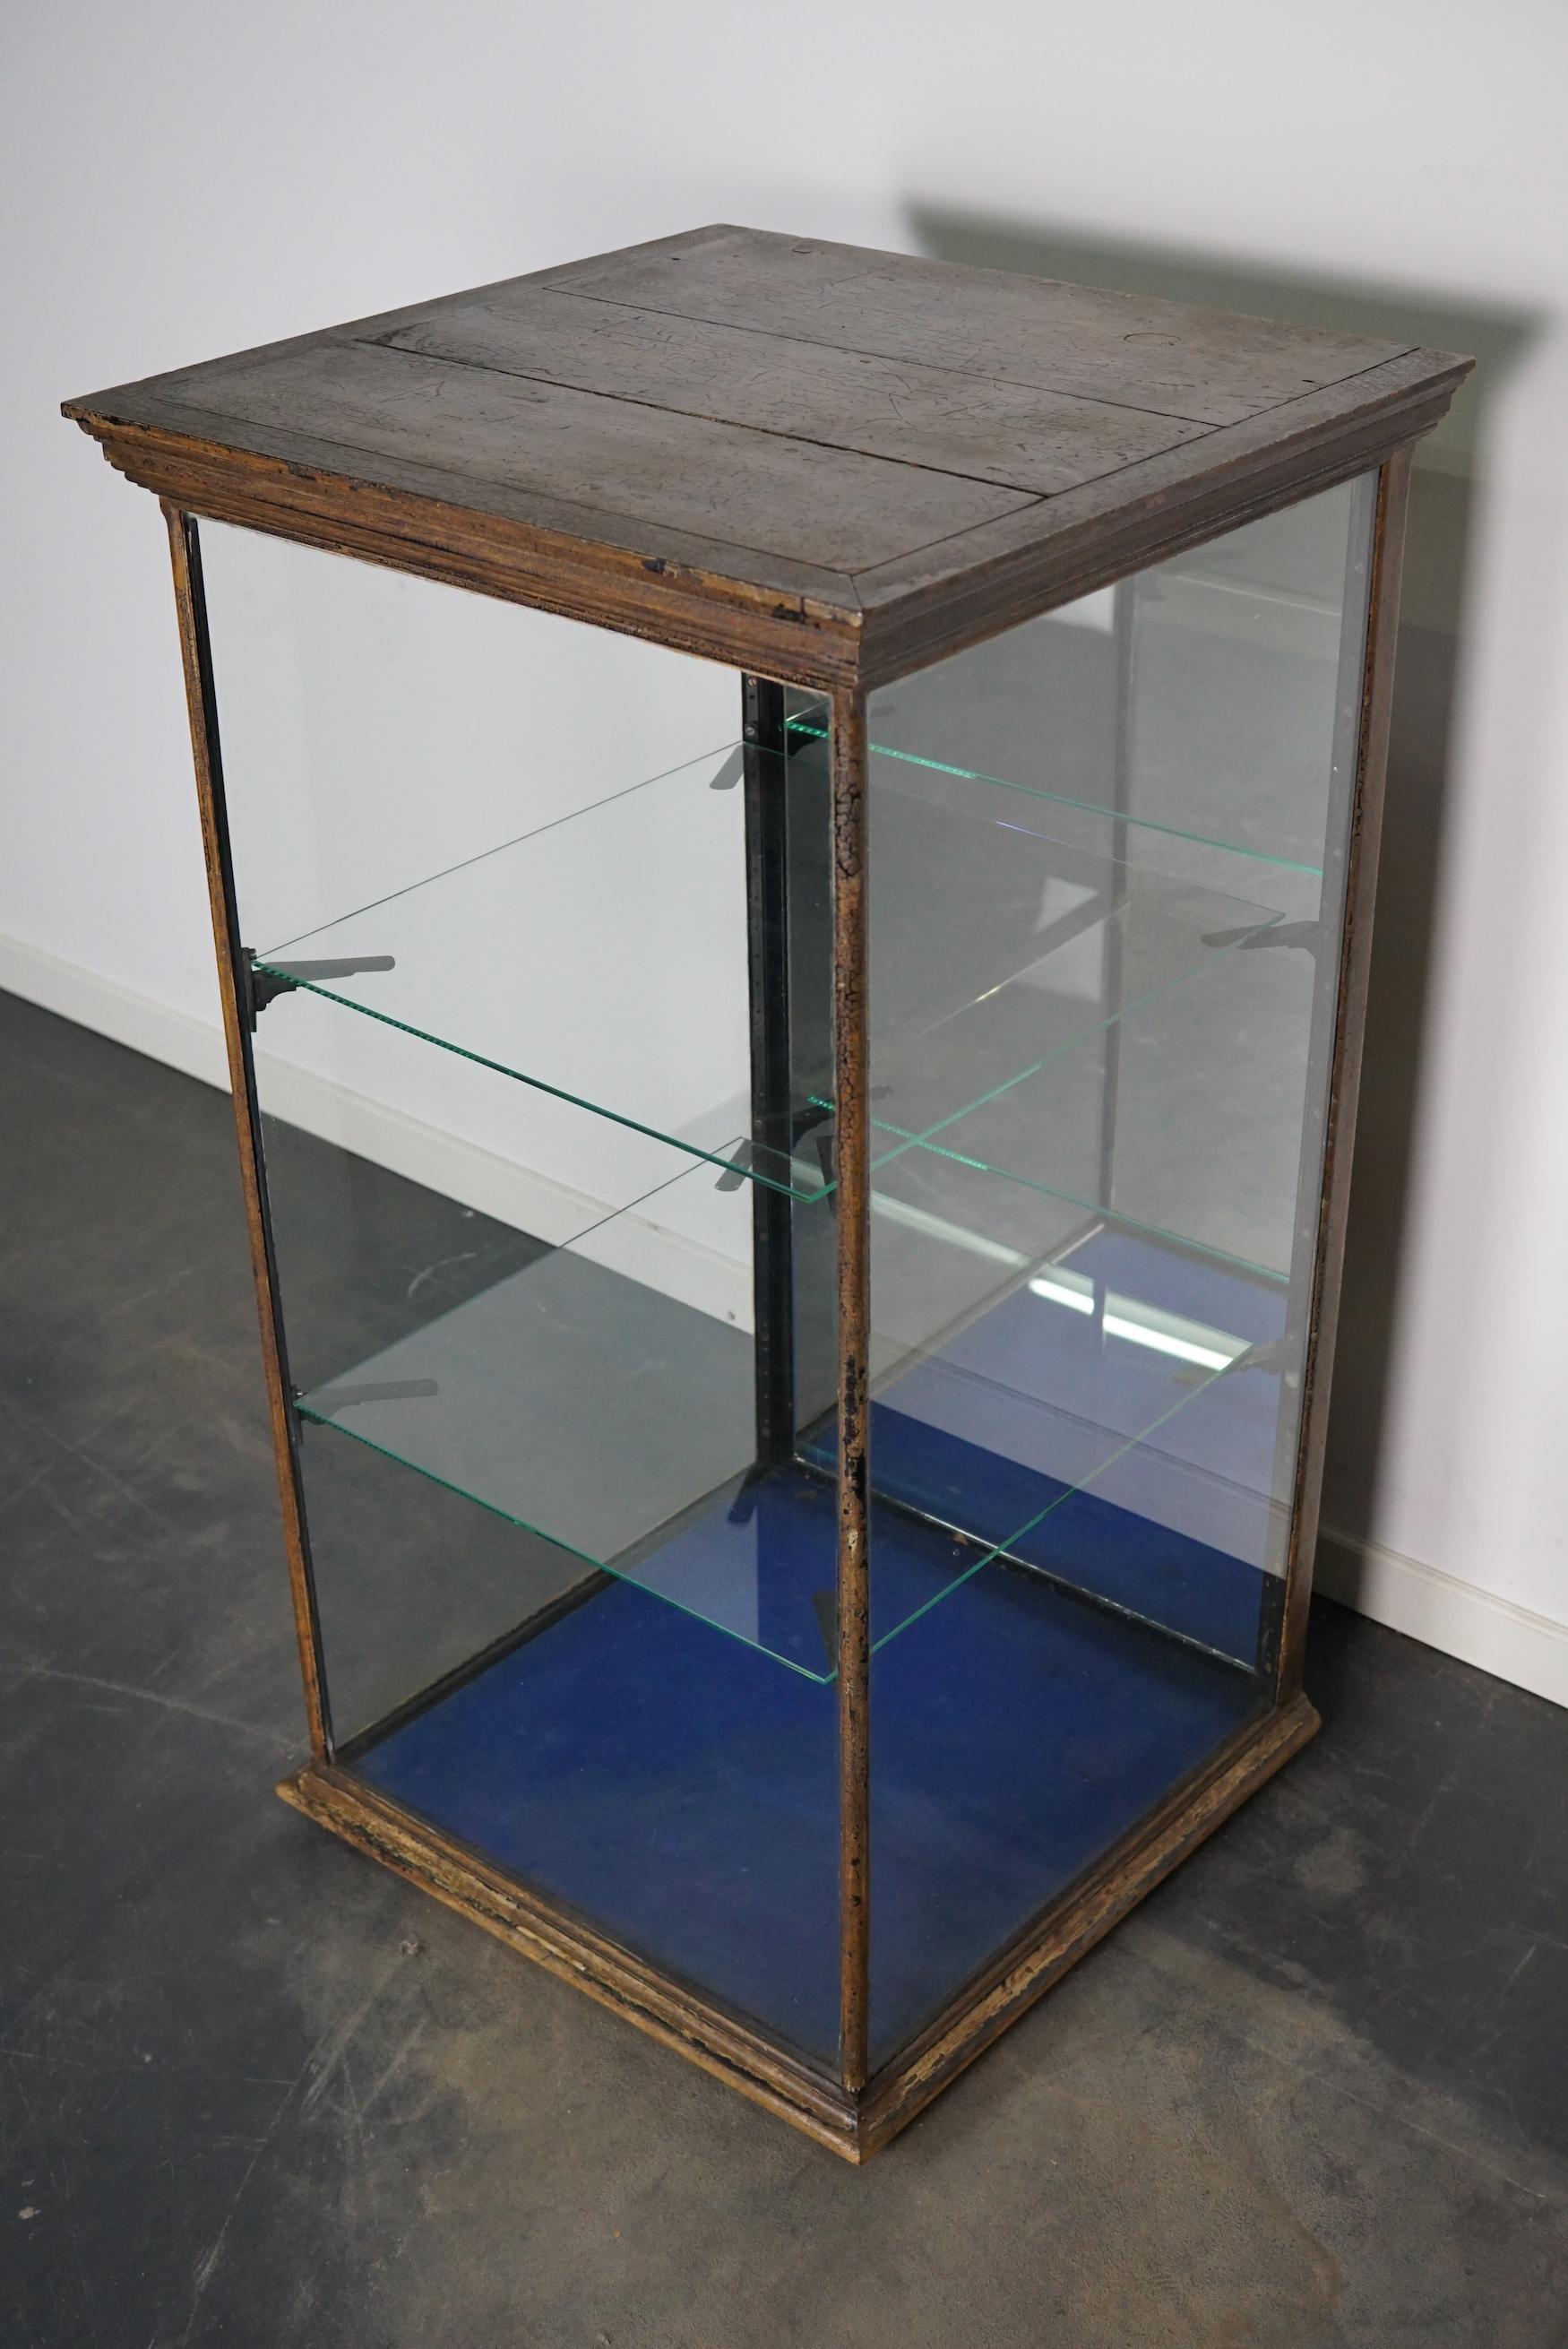 Late Victorian Victorian Painted Mahogany Shop Display Cabinet / Vitrine, Late 19th Century For Sale